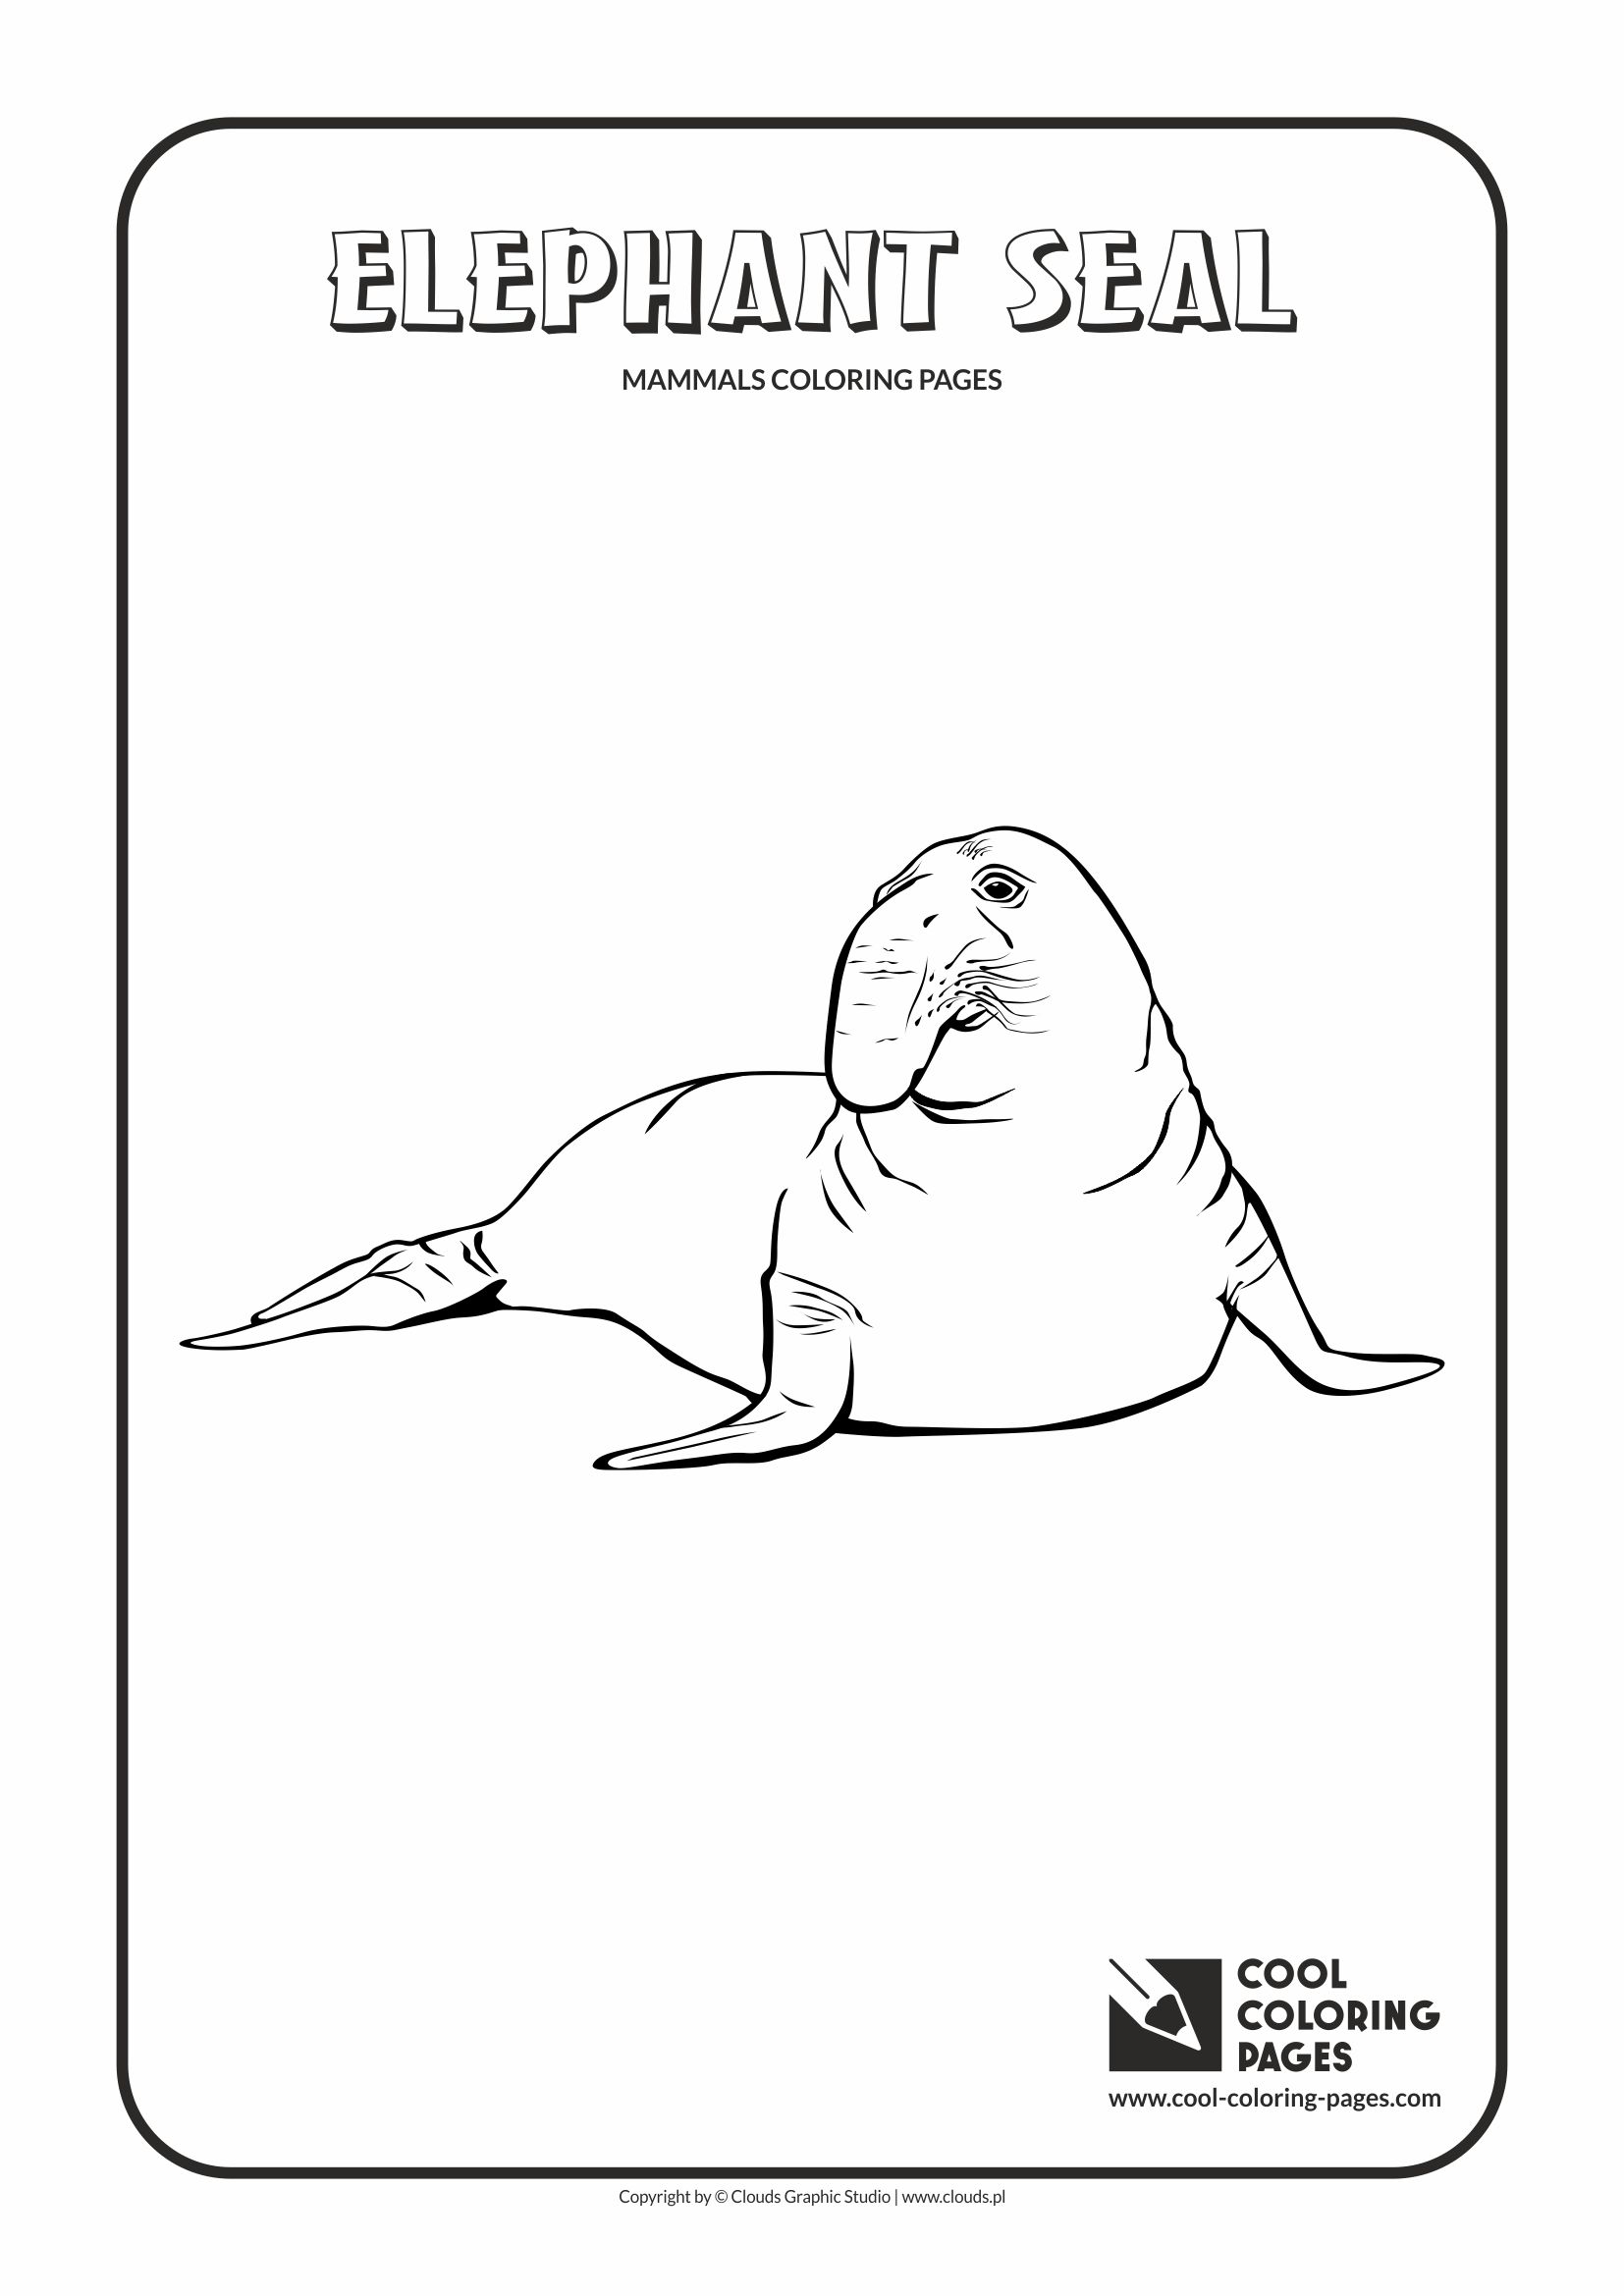 Cool coloring pages elephant seal coloring page